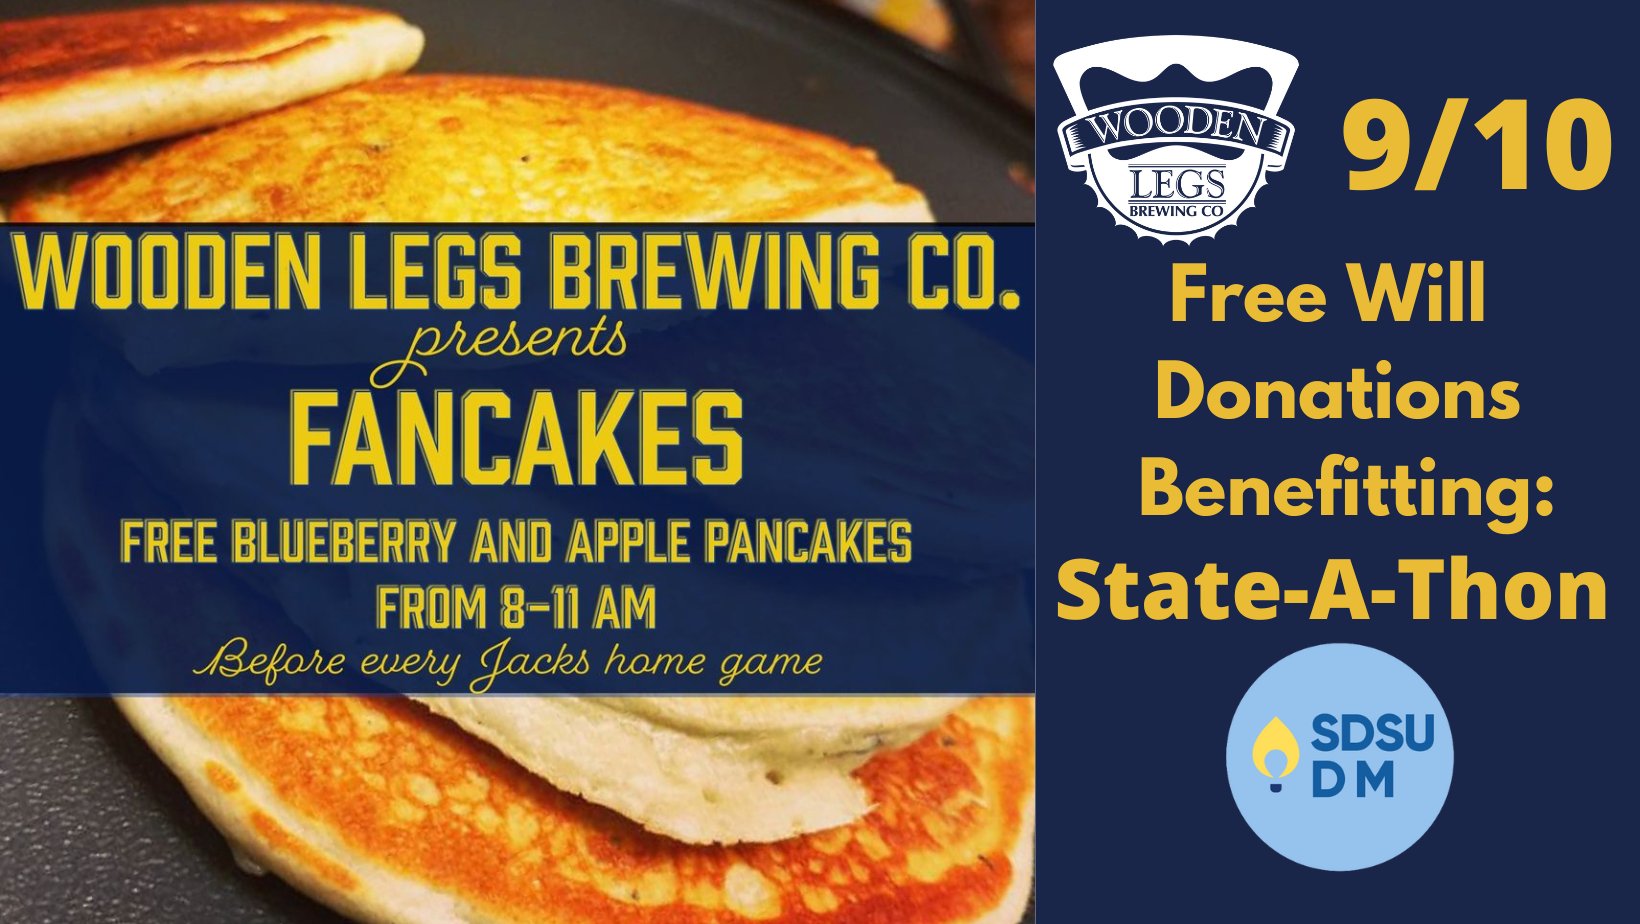 Fancakes at Wooden Legs